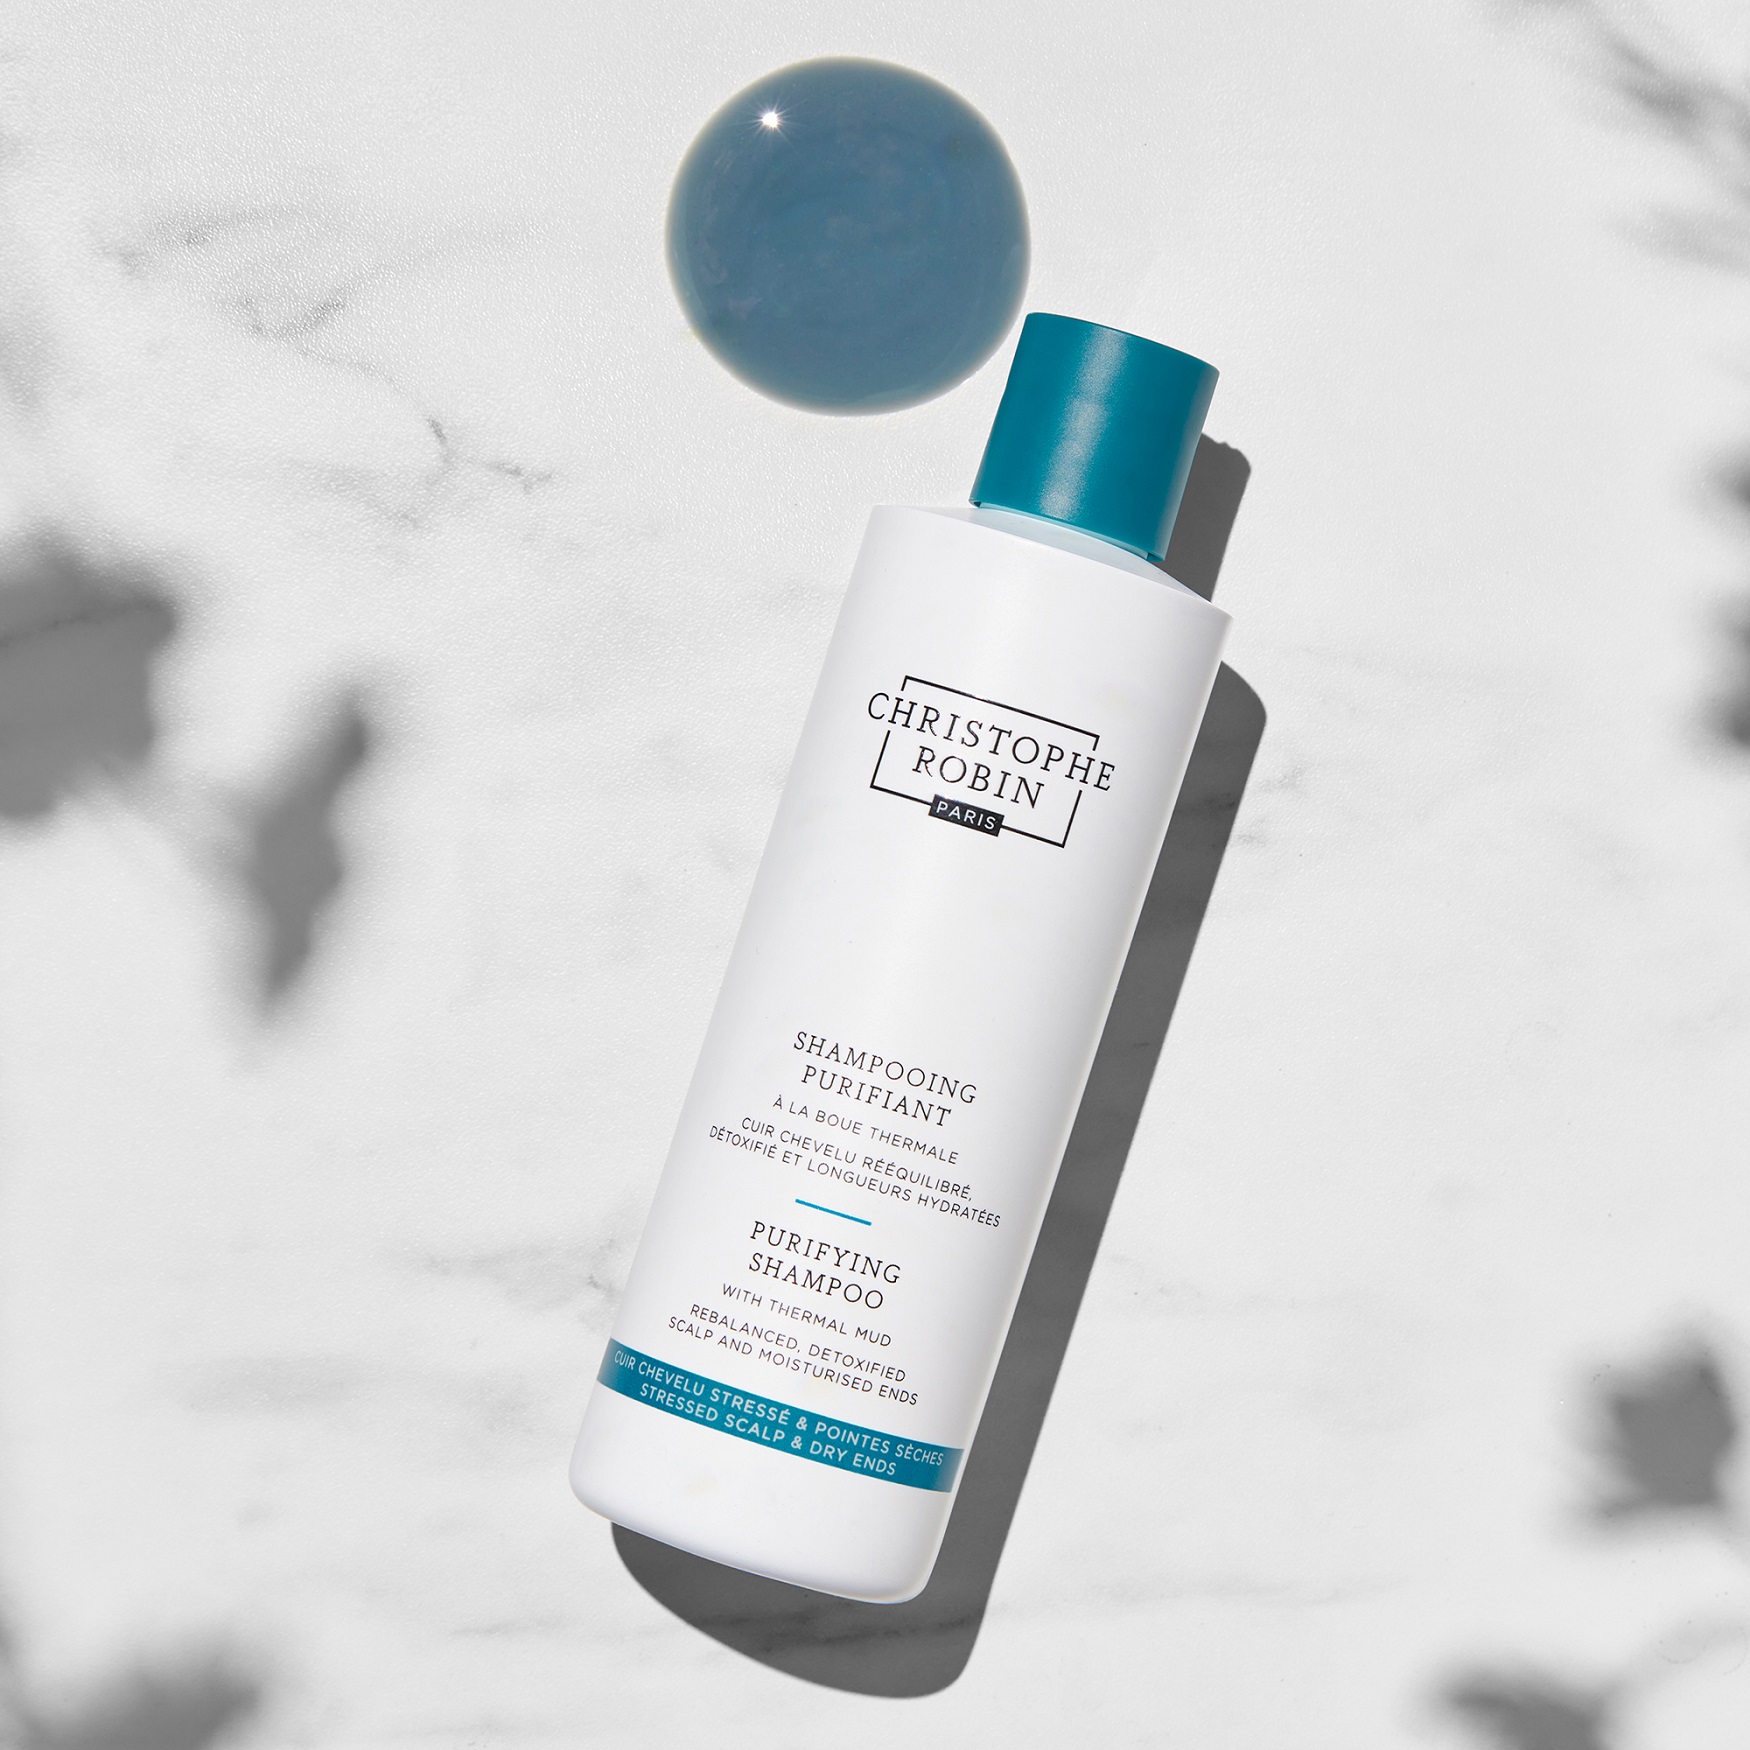 Christophe Robin Purifying Shampoo With Thermal Mud | Space NK